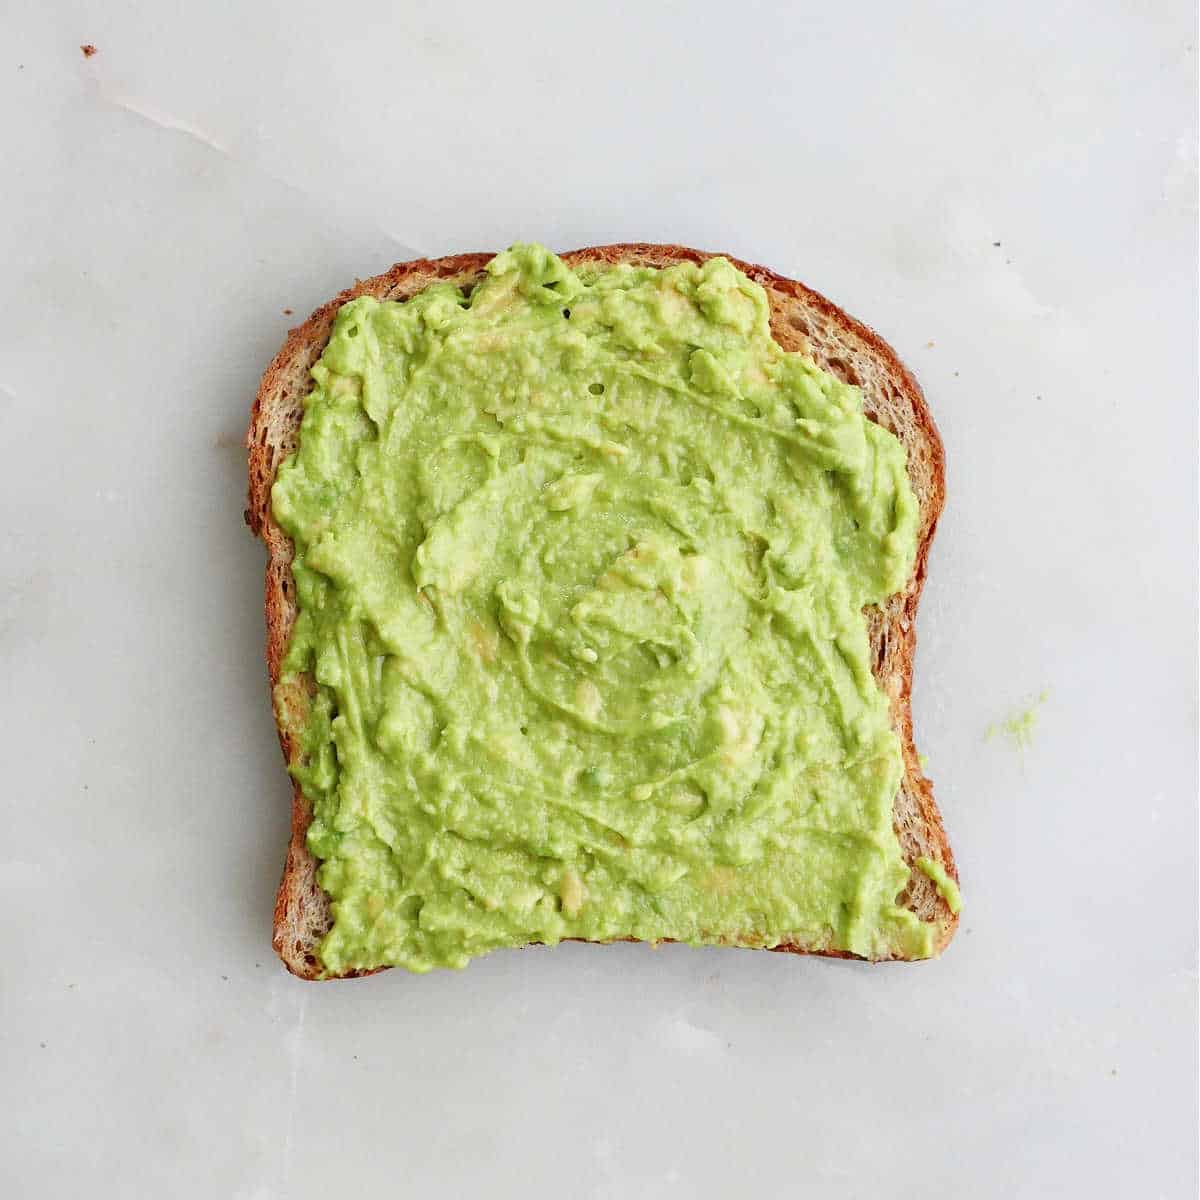 avocado spread onto a piece of toasted bread on a counter